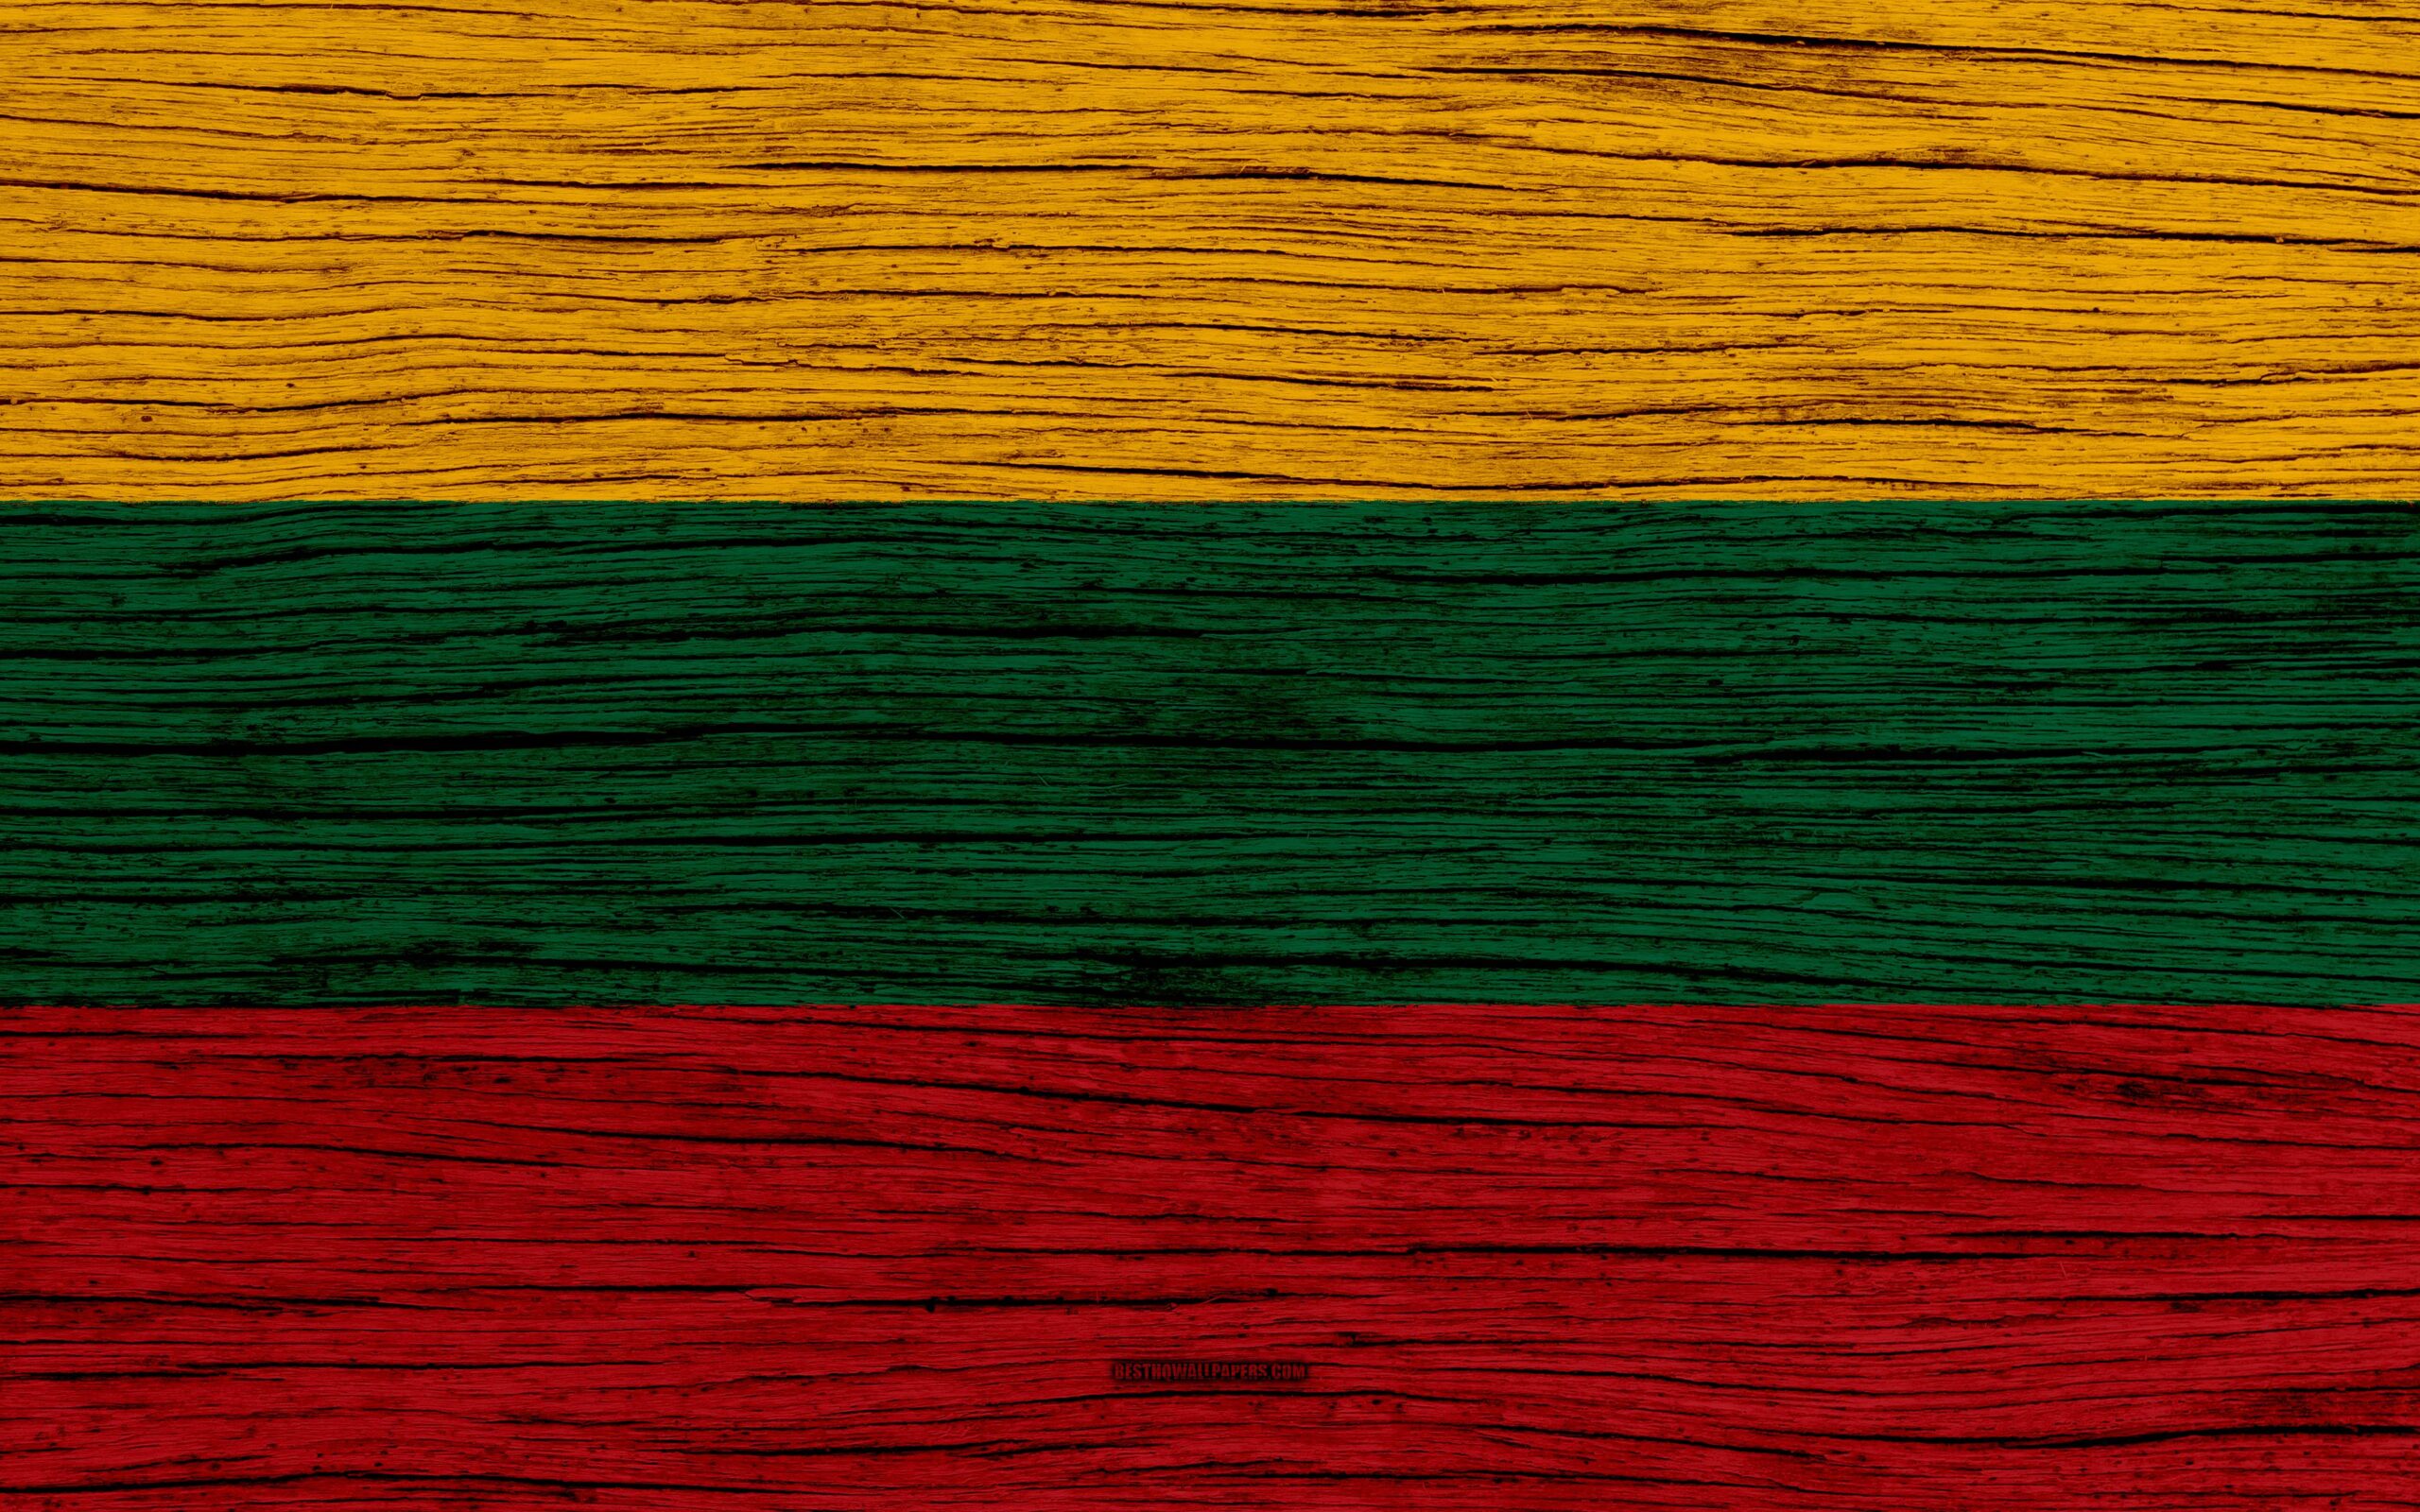 Download wallpapers Flag of Lithuania, 4k, Europe, wooden texture